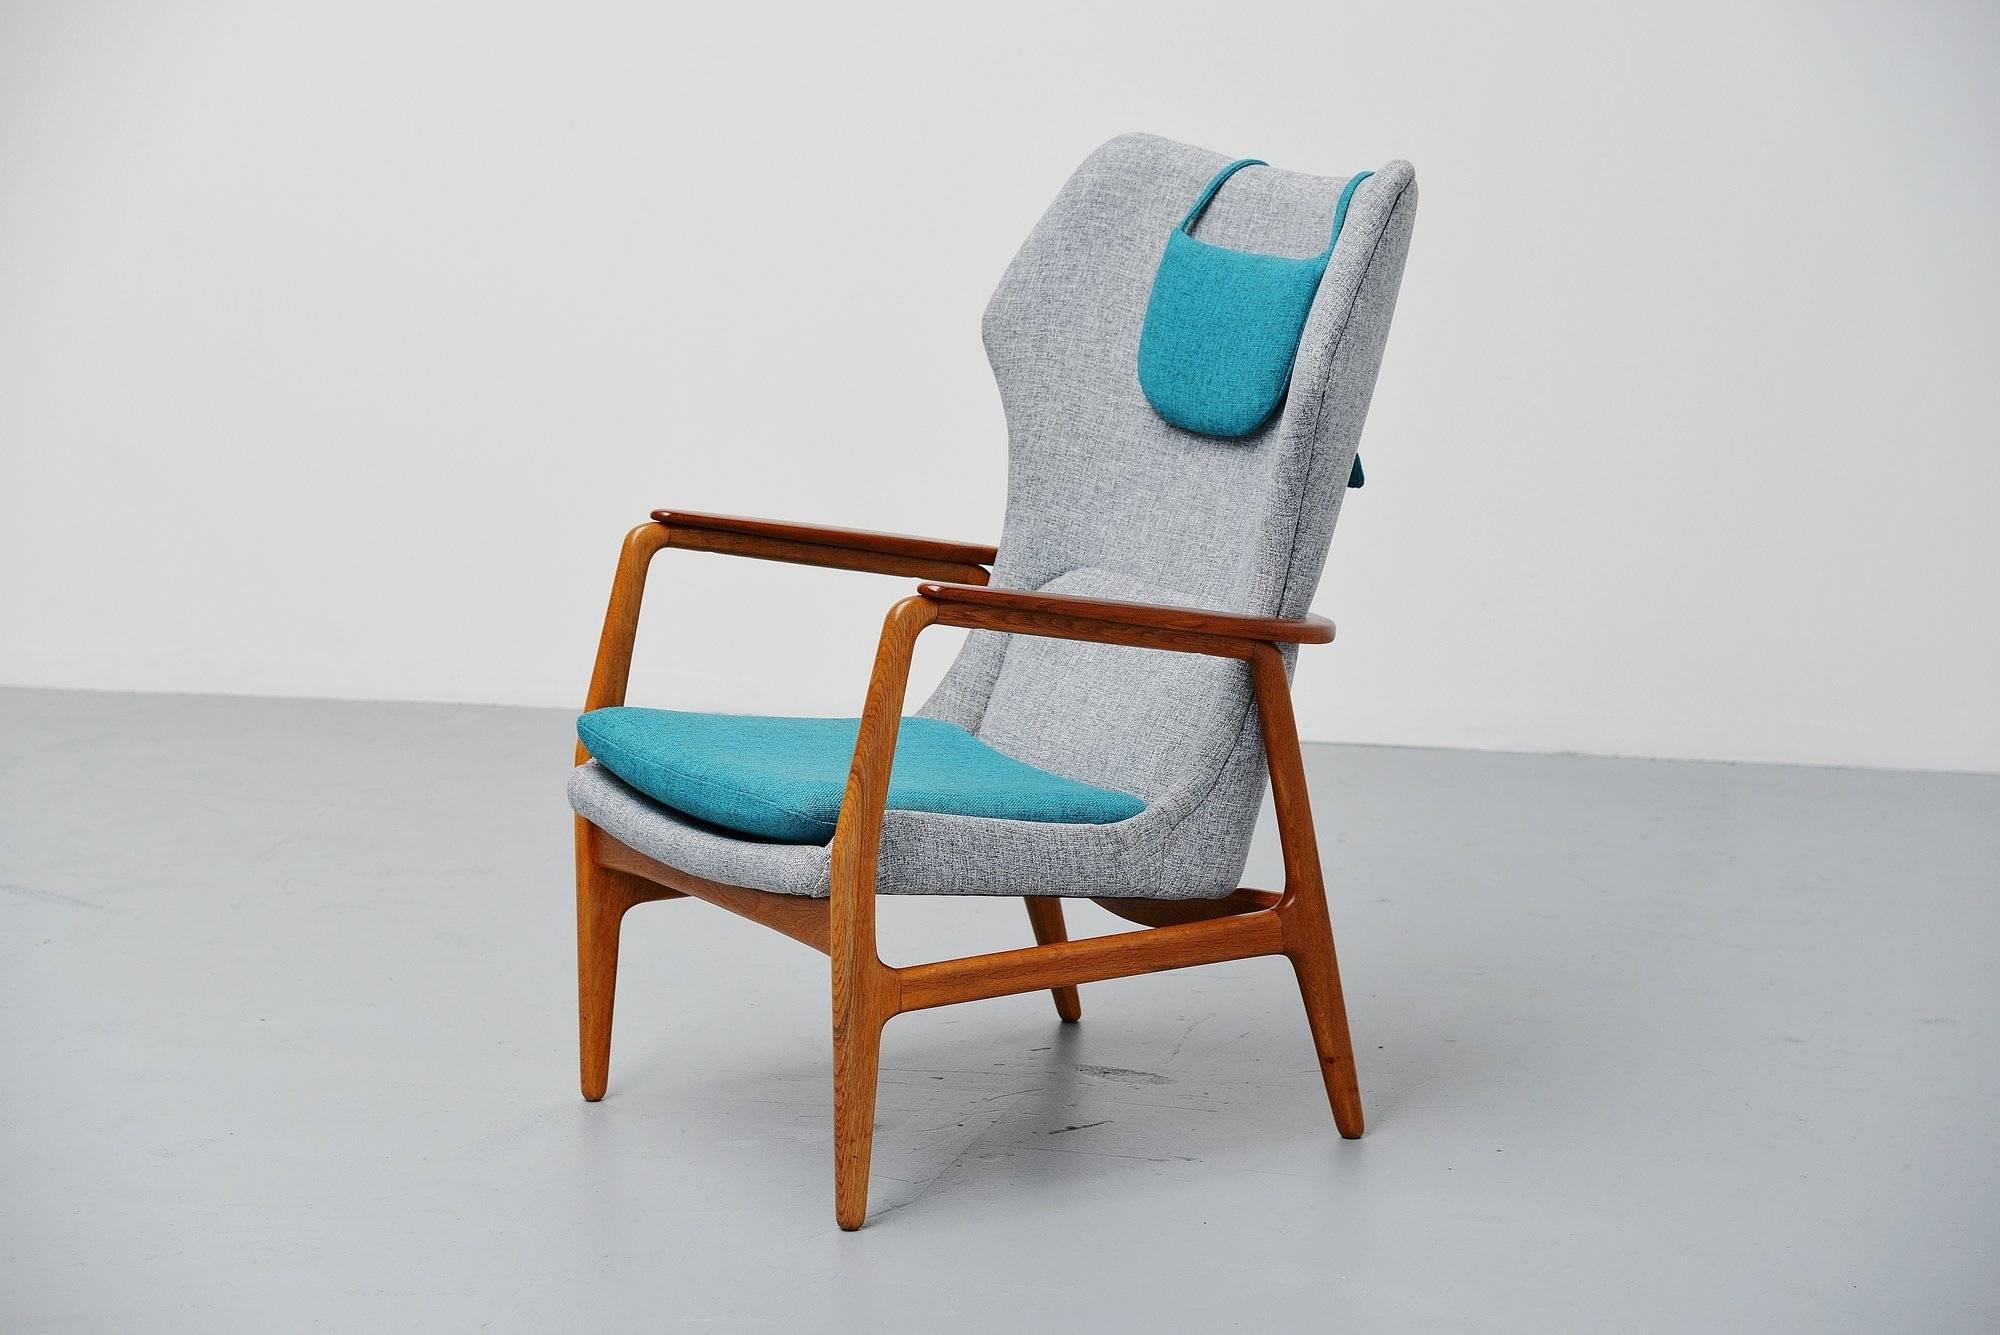 Very nice high lounge chair designed by Aksel Bender Madsen and Schubell and manufactured by Bovenkamp, Holland 1960. Aksel Bender Madsen was attracted by Bovenkamp to work for them and 1950s begin of the 1960s. He designed and helped Bovenkamp to